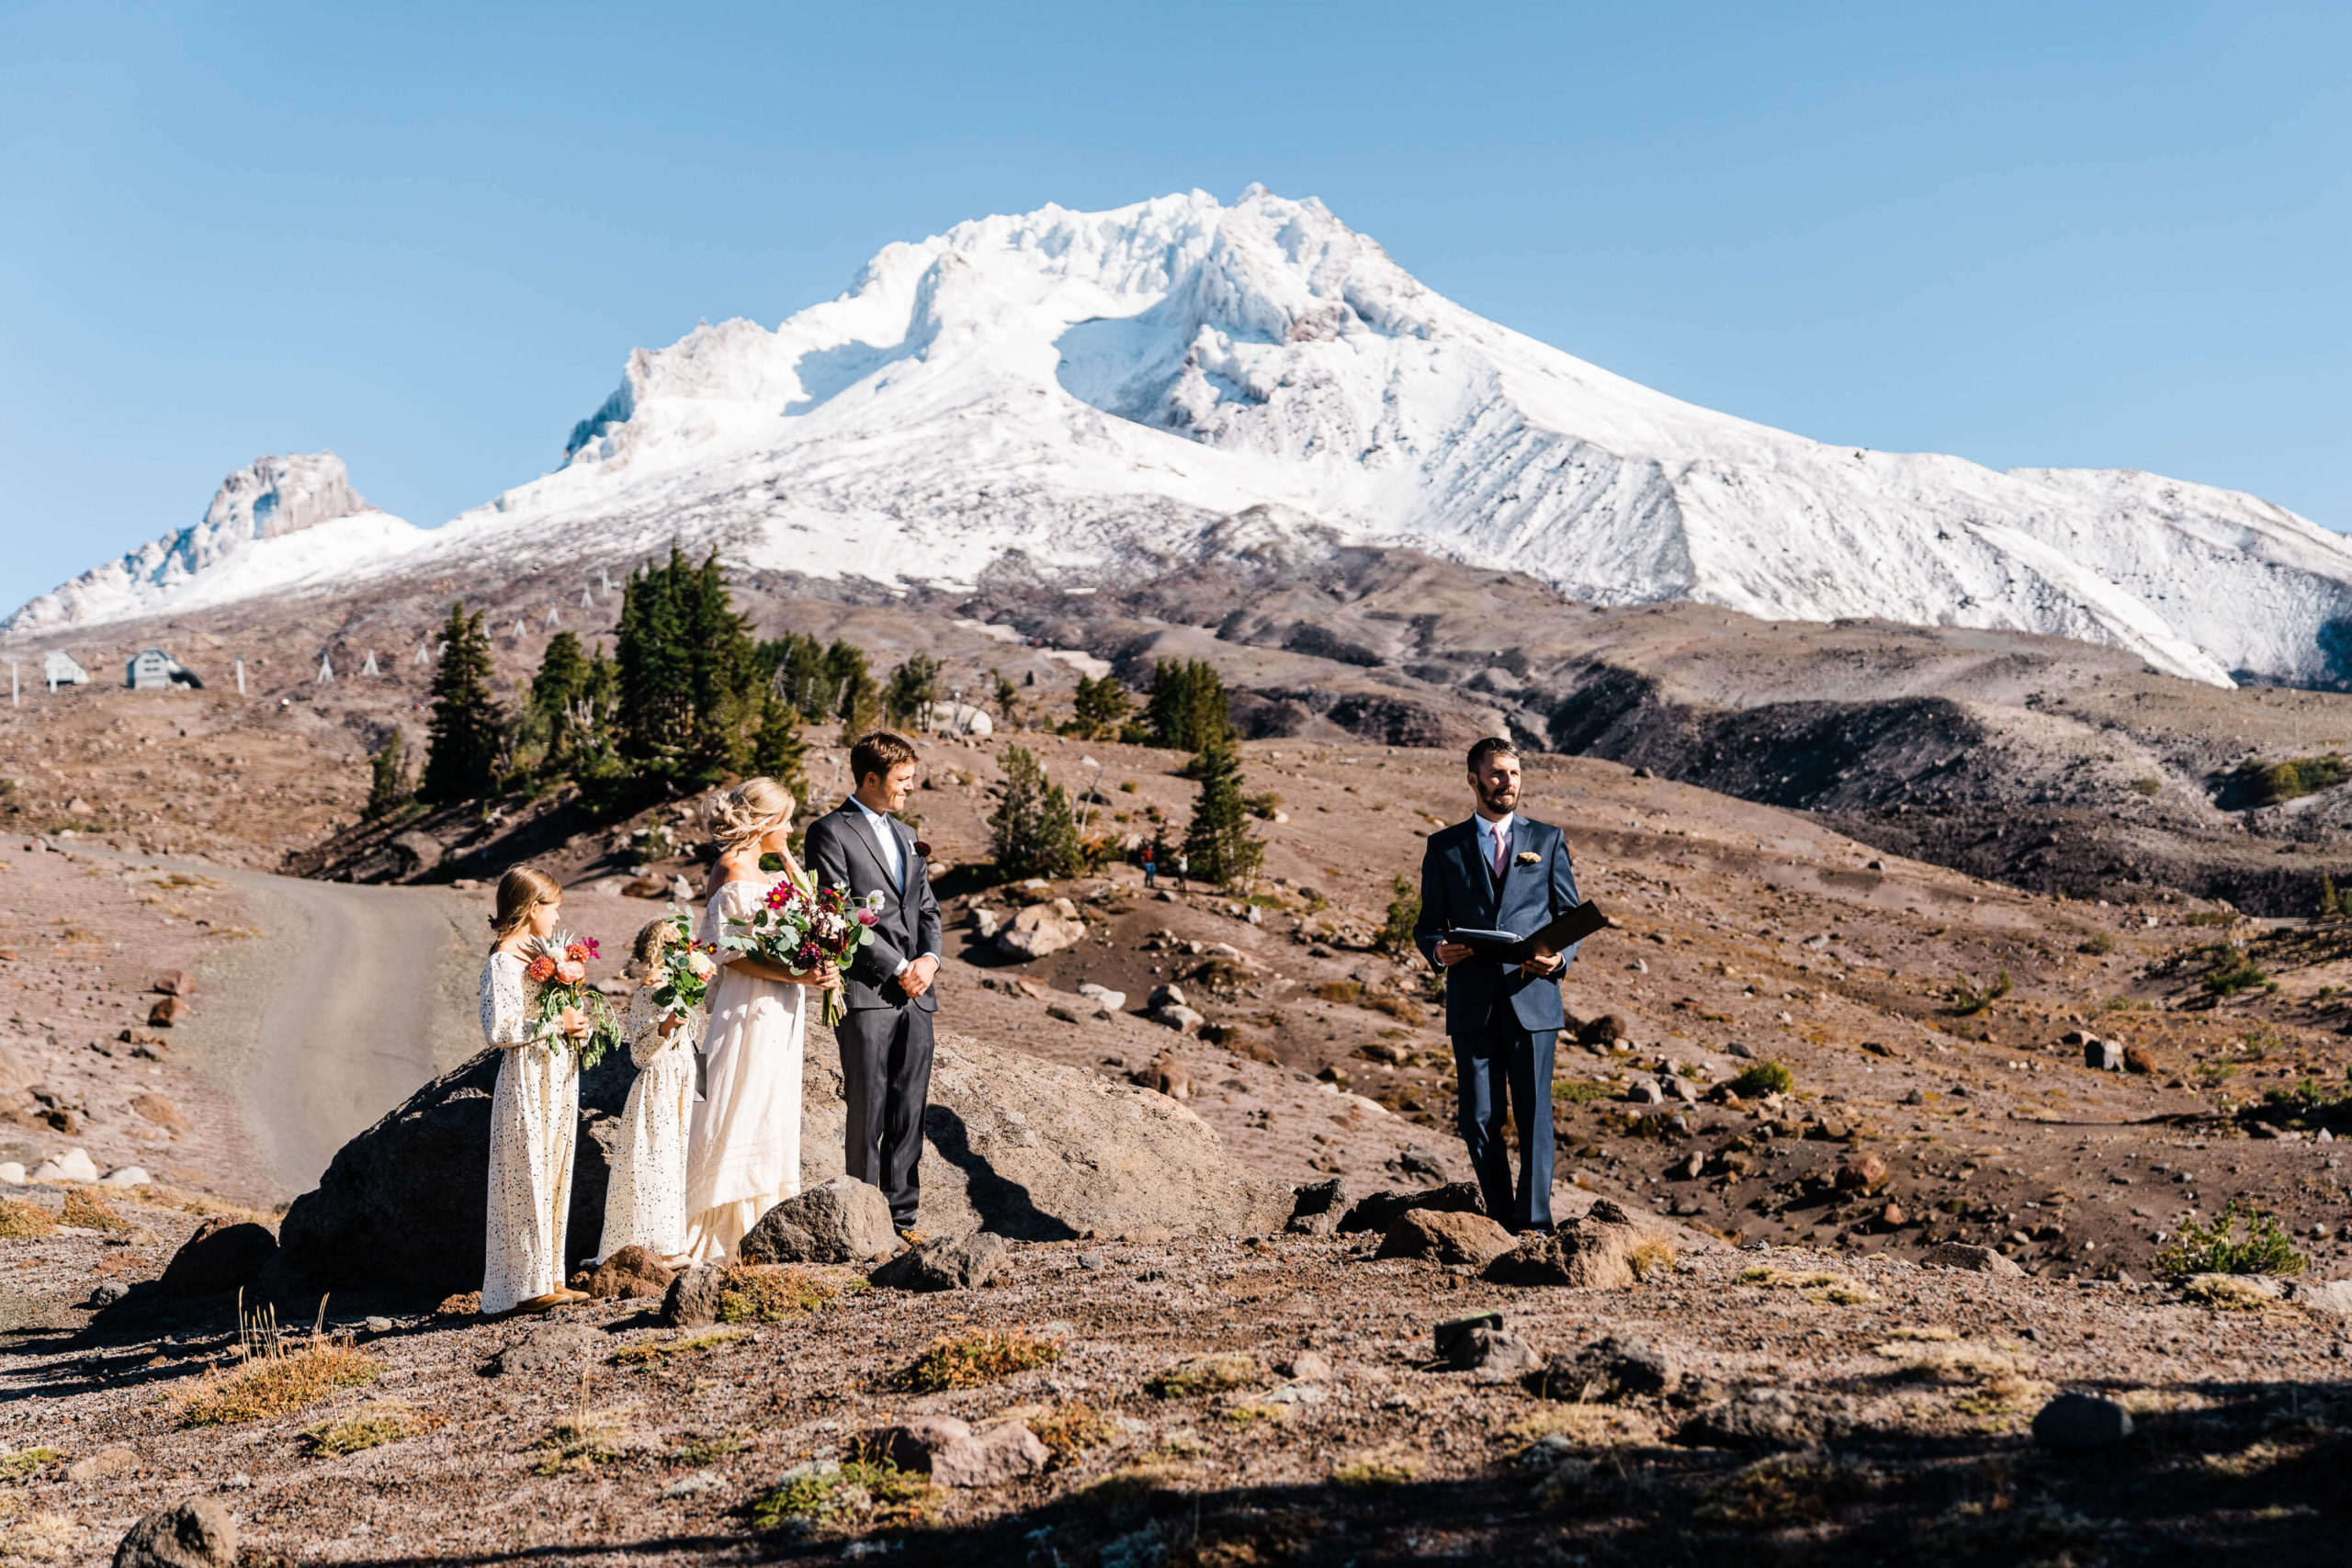 wedding ceremony with flower girls at the base of a snowy mountain